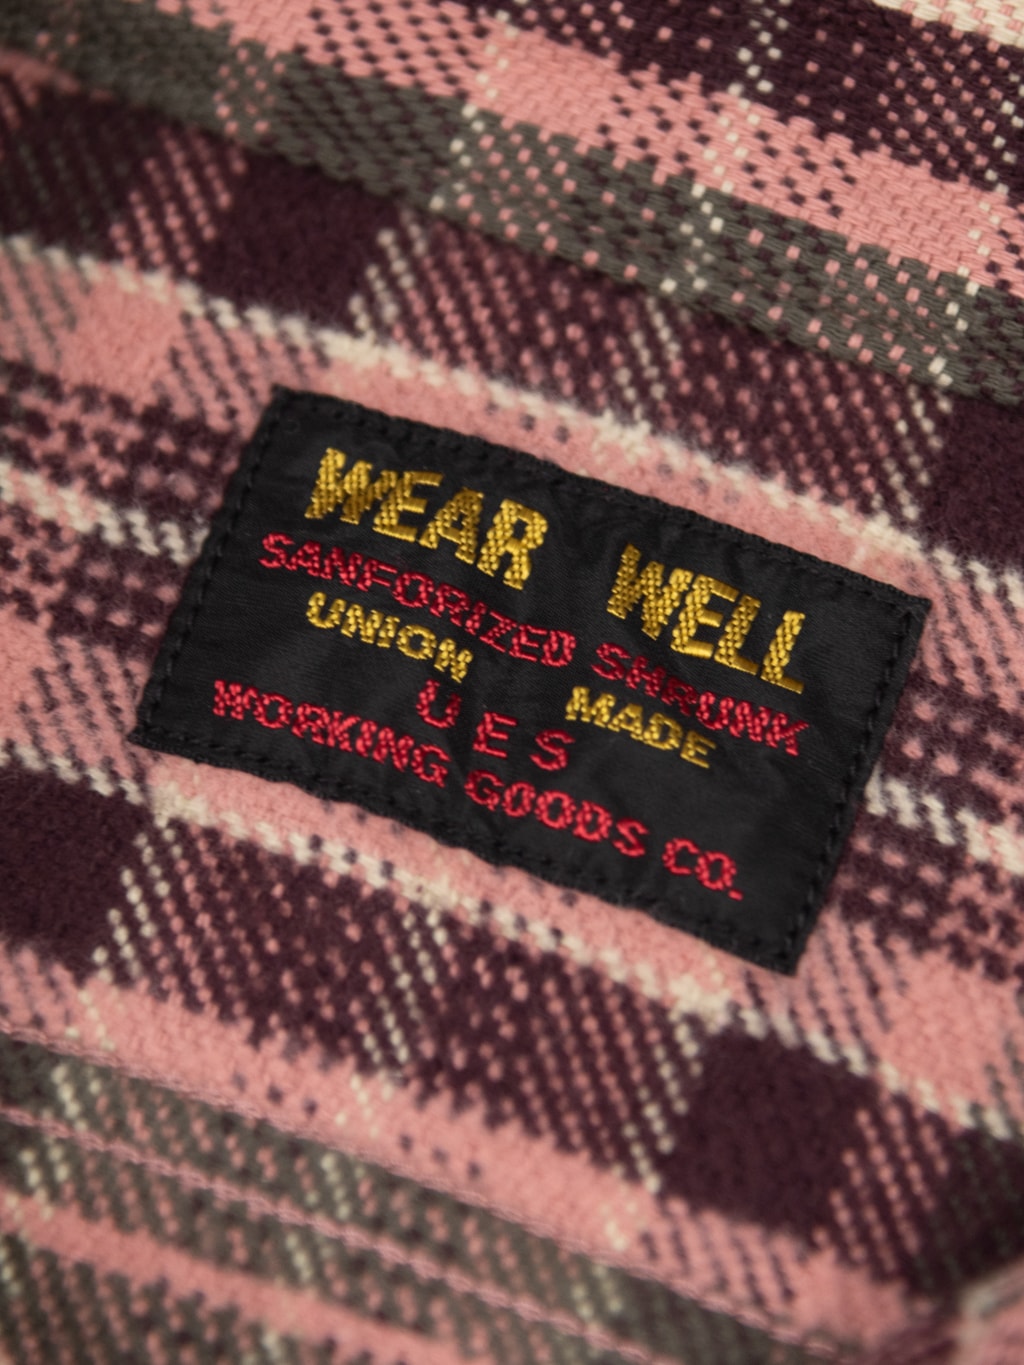 UES Heavy selvedge Flannel Shirt pink brand interior tag